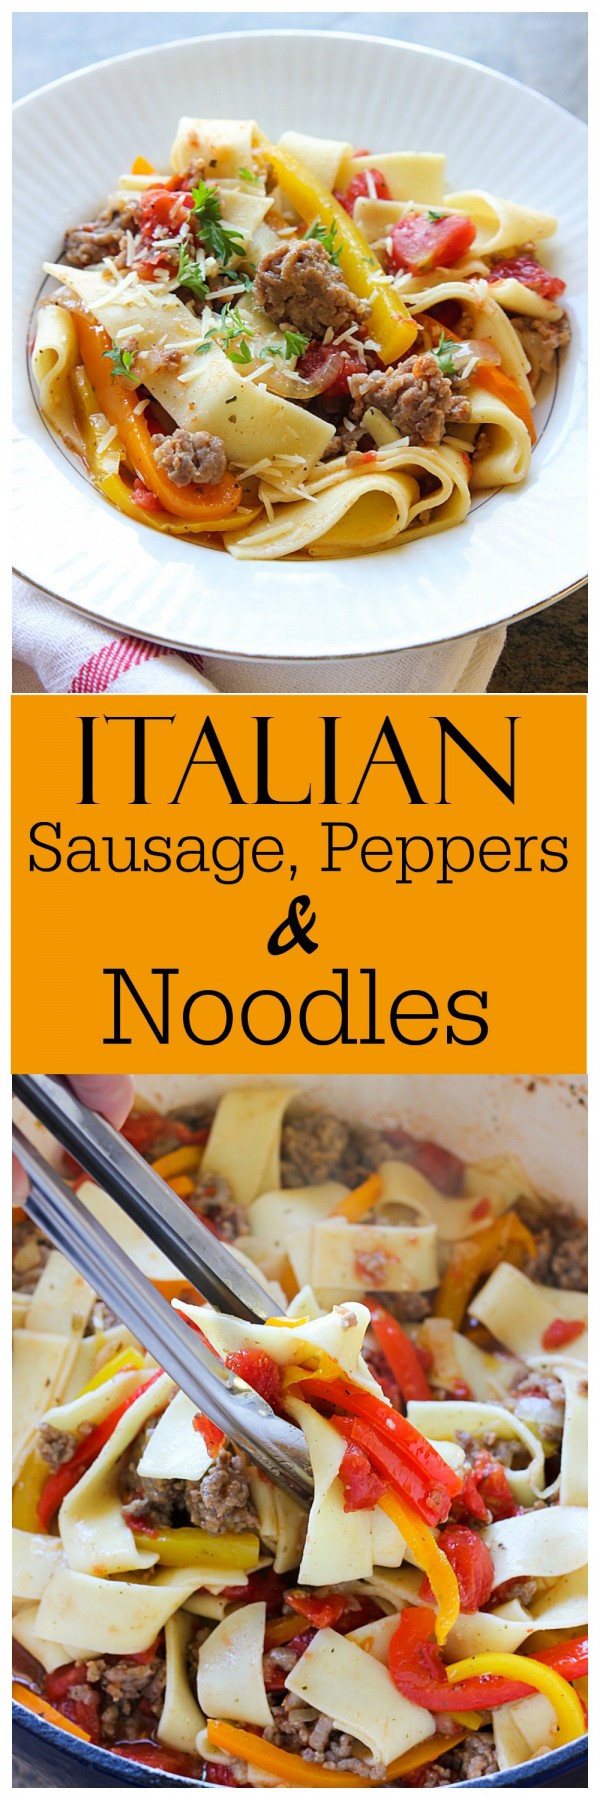 Italian Sausage, Peppers and Noodles | Mandy's Recipe Box